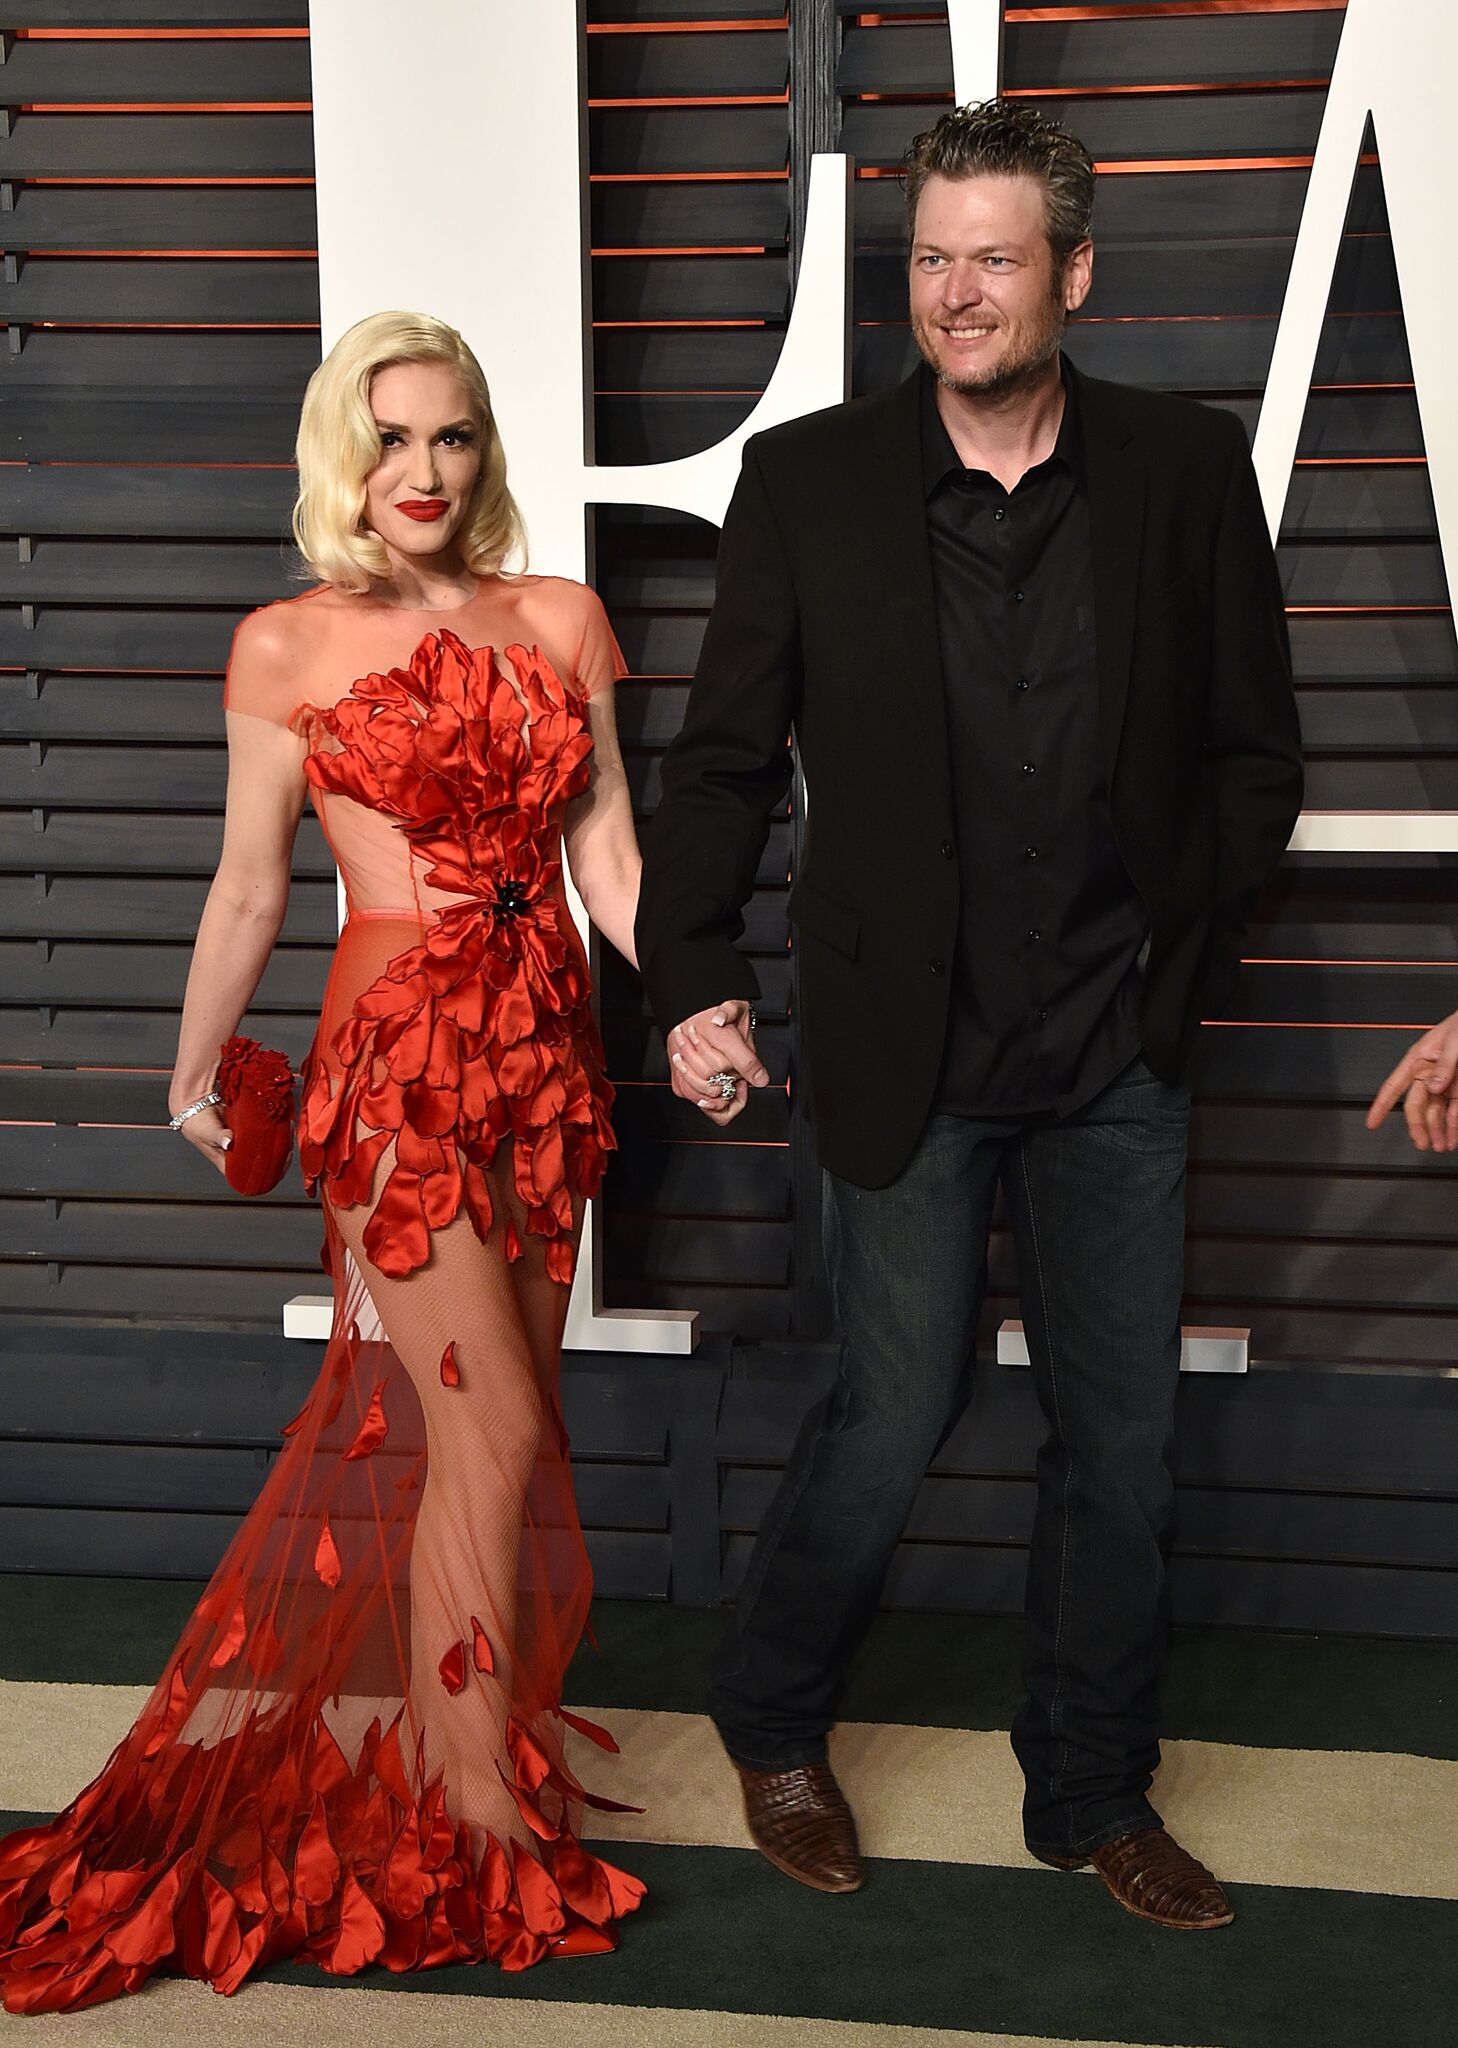  Recording artists Gwen Stefani (L) and Blake Shelton arrive at the 2016 Vanity Fair Oscar Party Hosted By Graydon Carter  | Getty Images